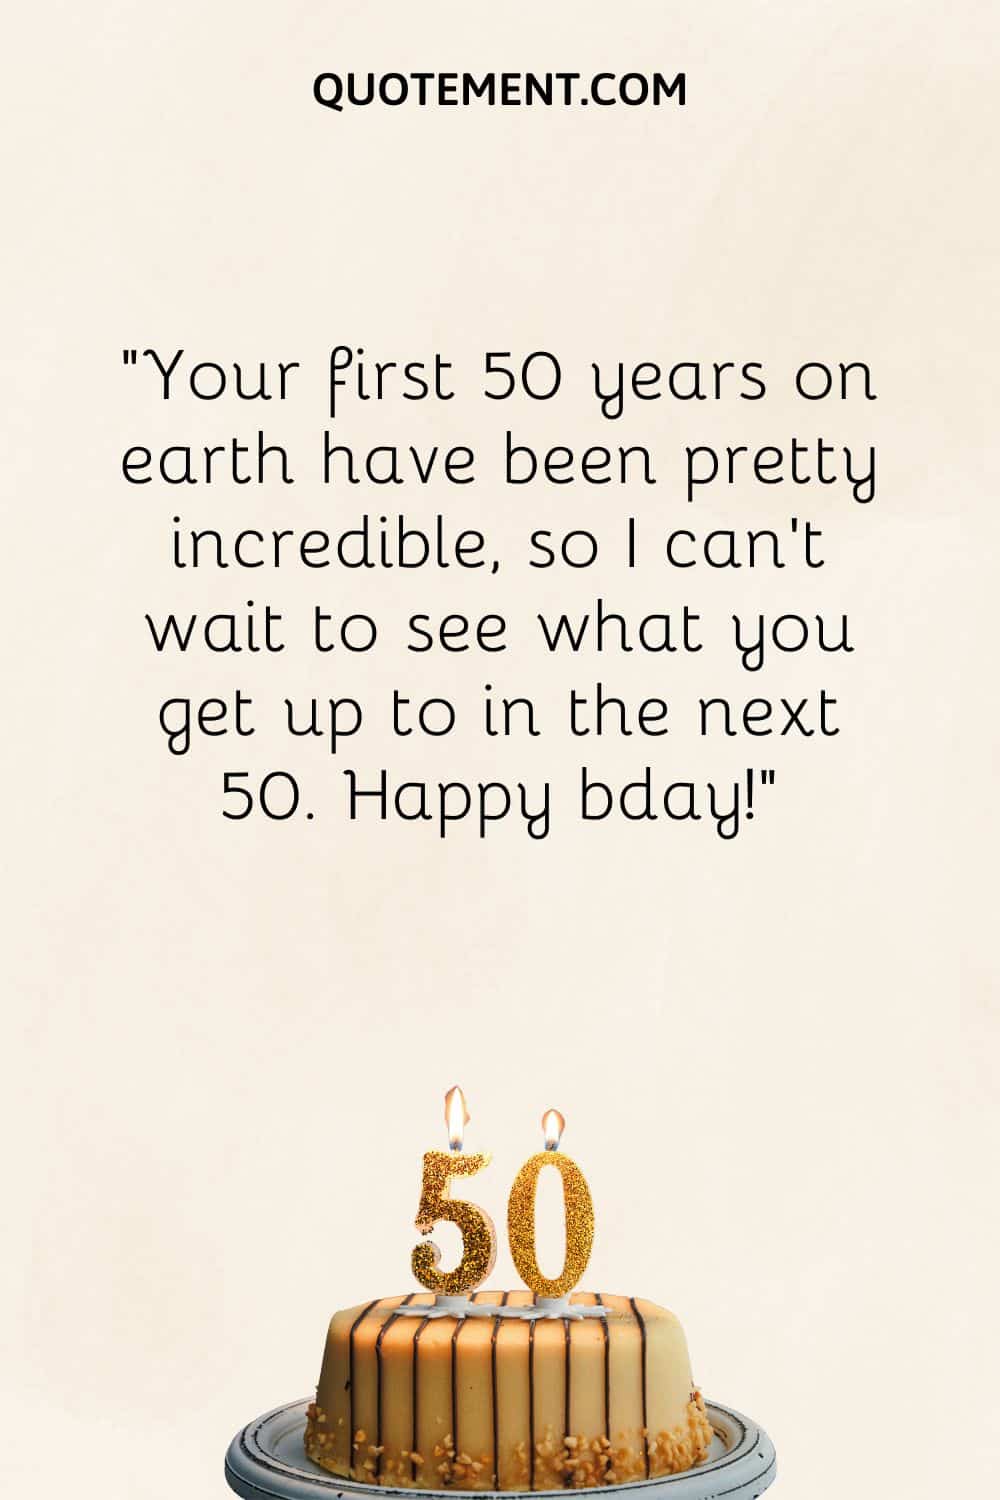 170 Happy 50th Birthday Wishes For Hitting The Golden 50s